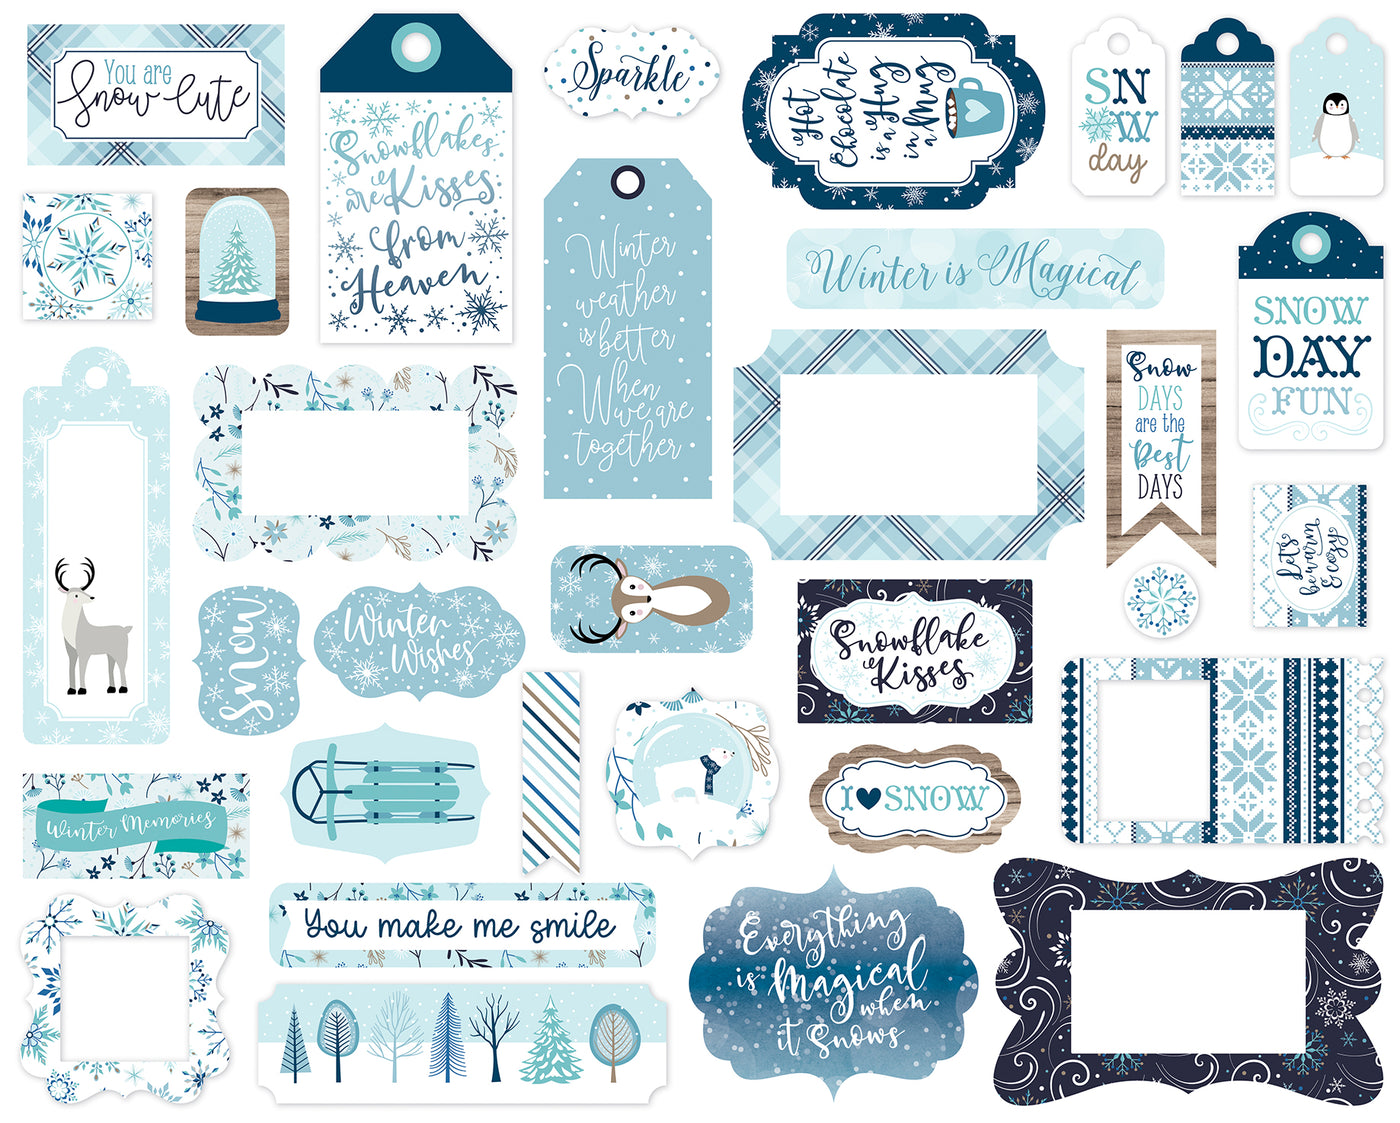 Winter Magic Frames & Tags Die Cut Cardstock Pack.  Pack includes 33 different die-cut shapes ready to embellish any project.